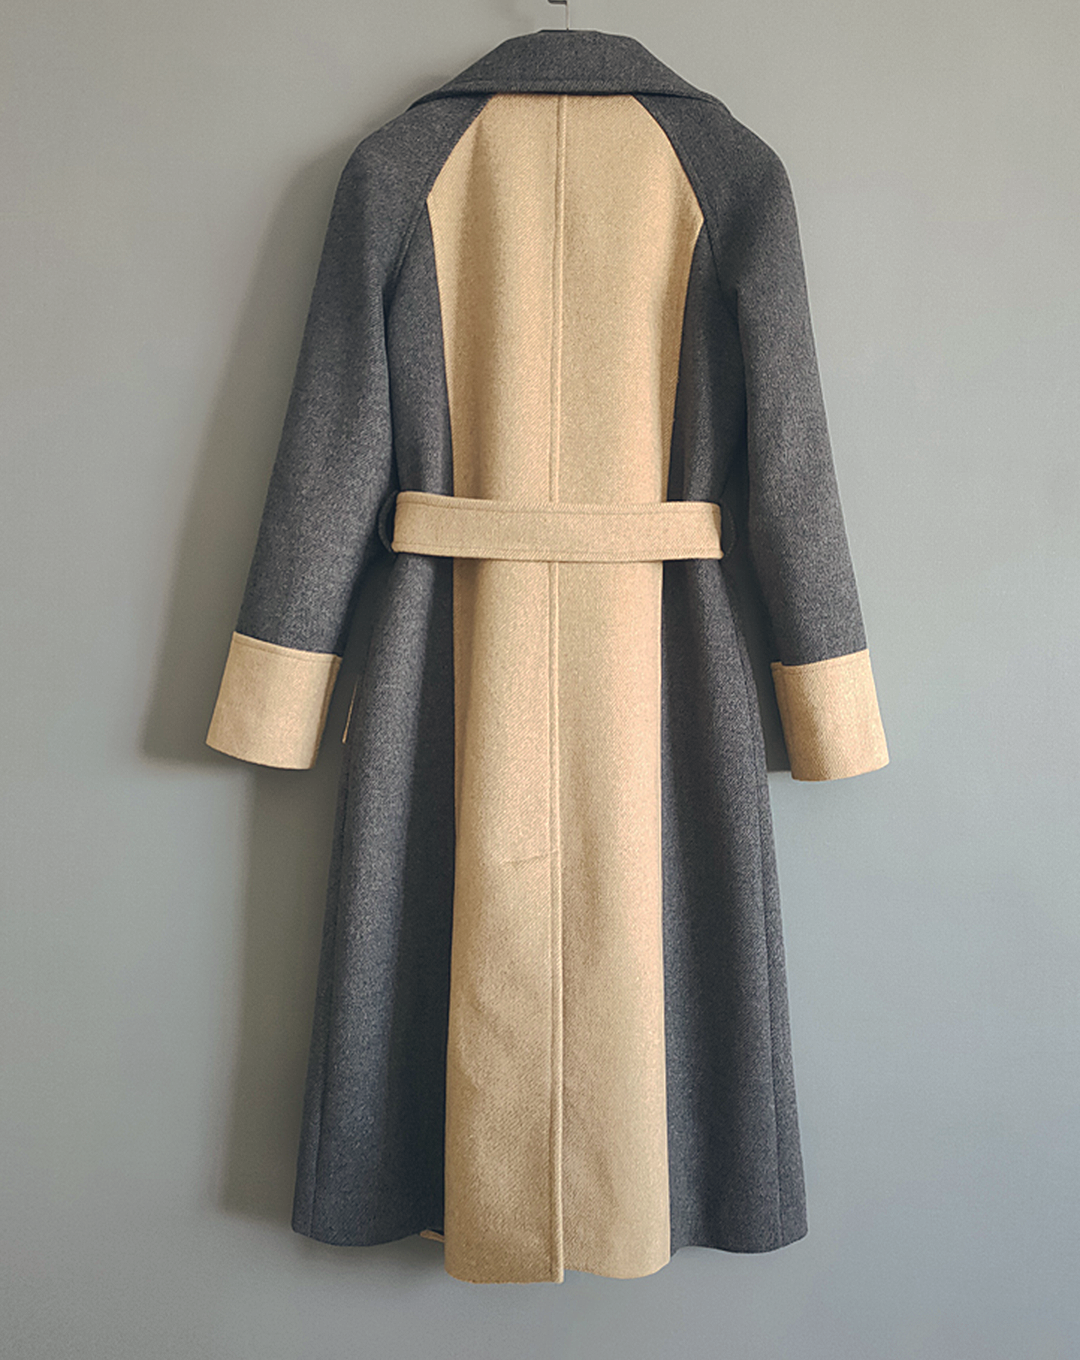 ♀Bicolor Double Breasted Wool Coat